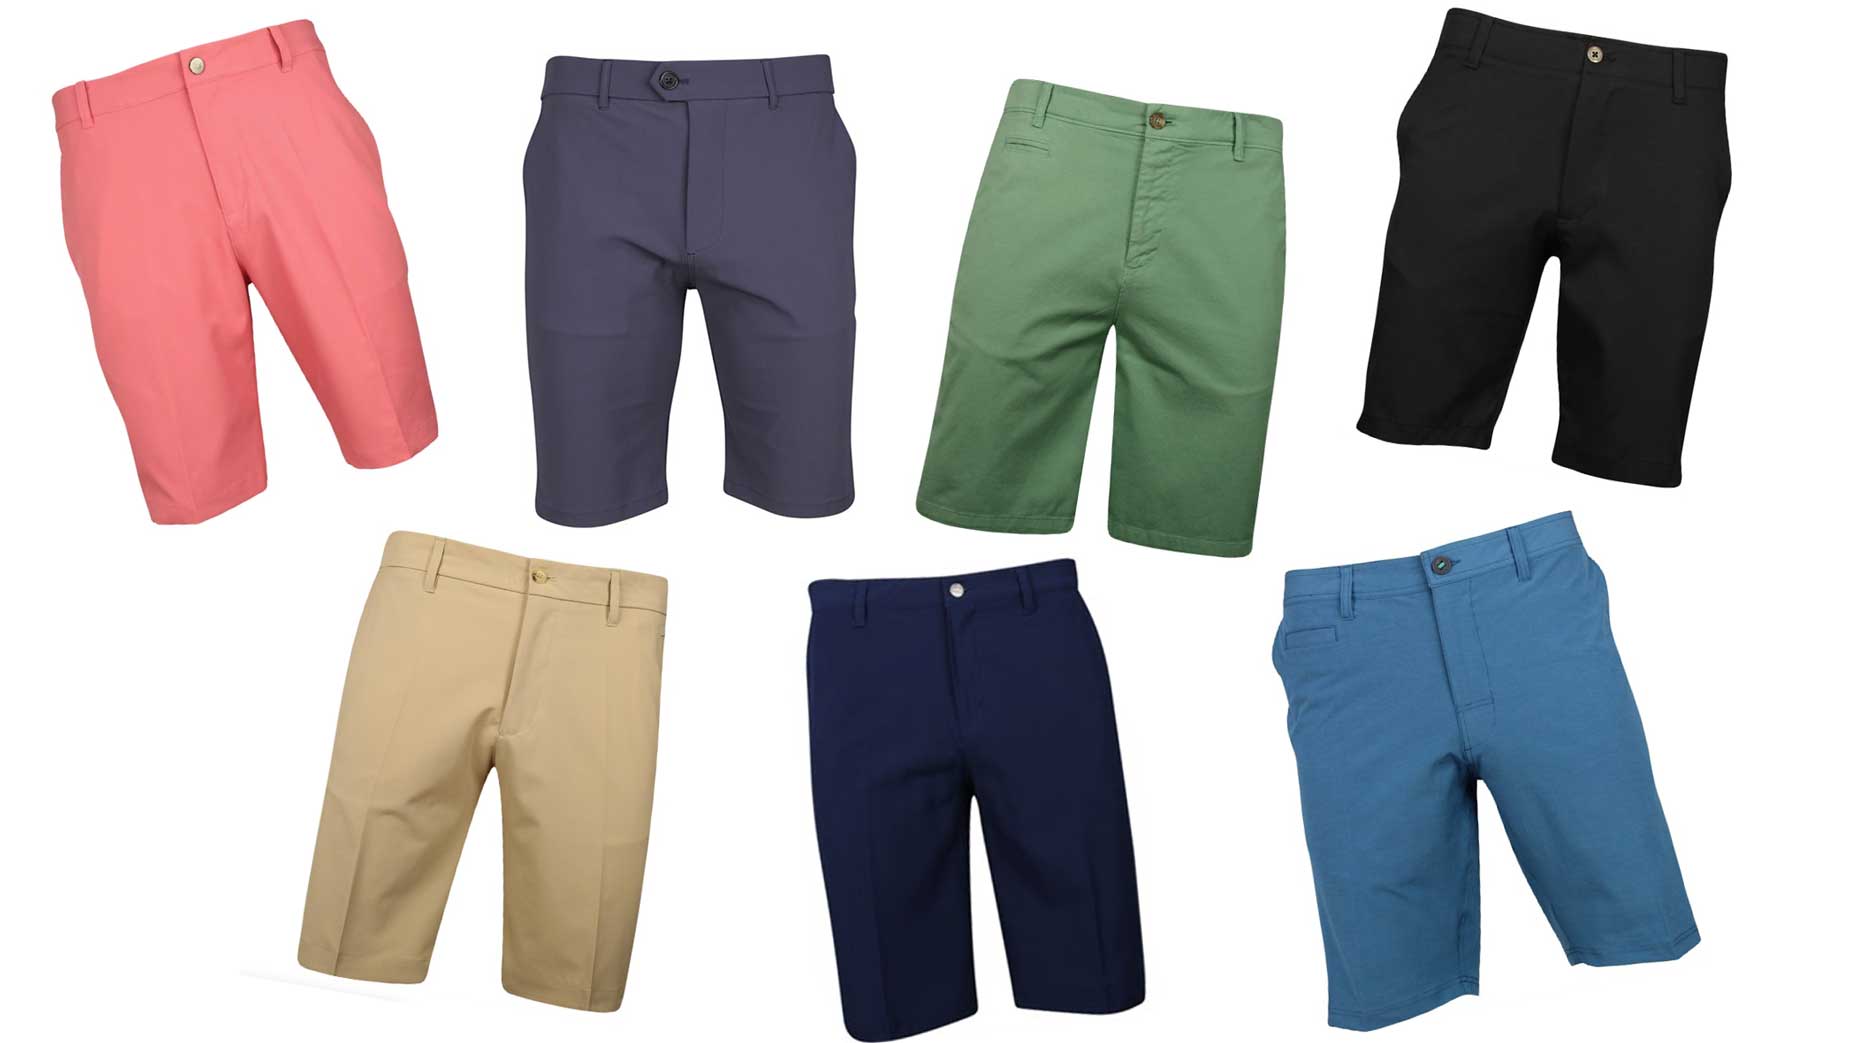 Best golf shorts: 7 best golf shorts to buy right now in our Pro Shop